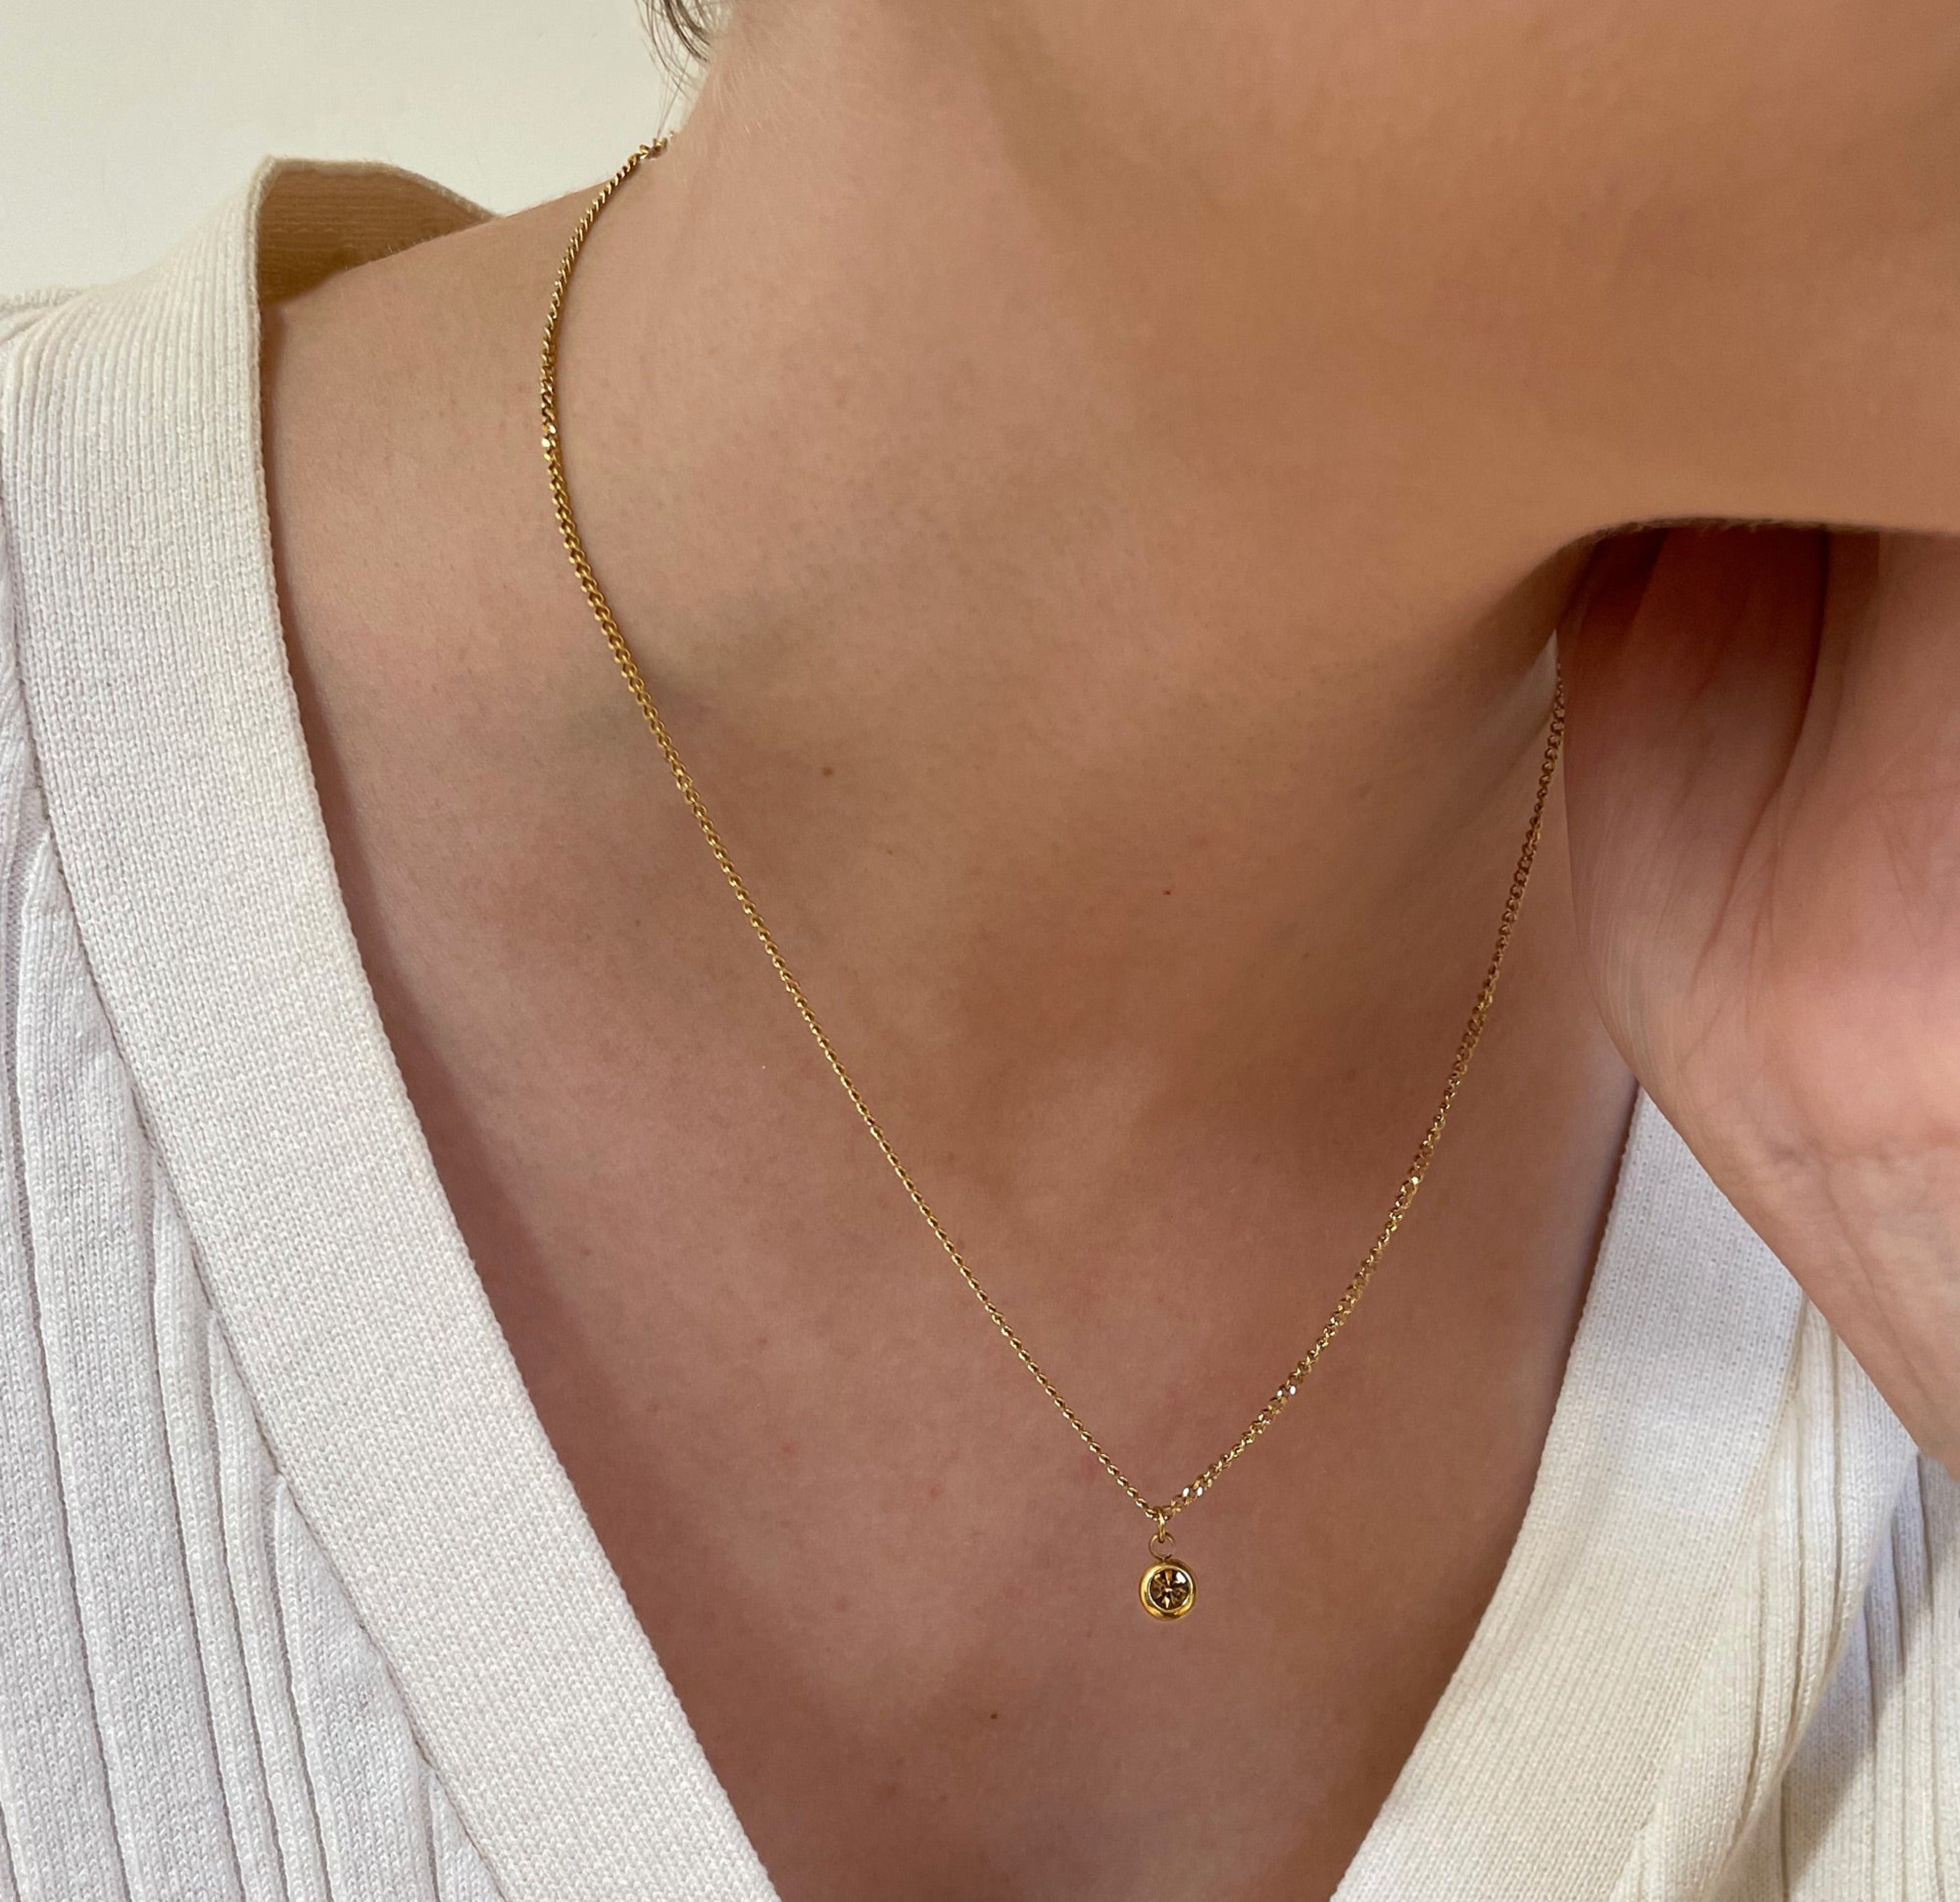 GOLD DAINTY PENDANT NECKLACE 